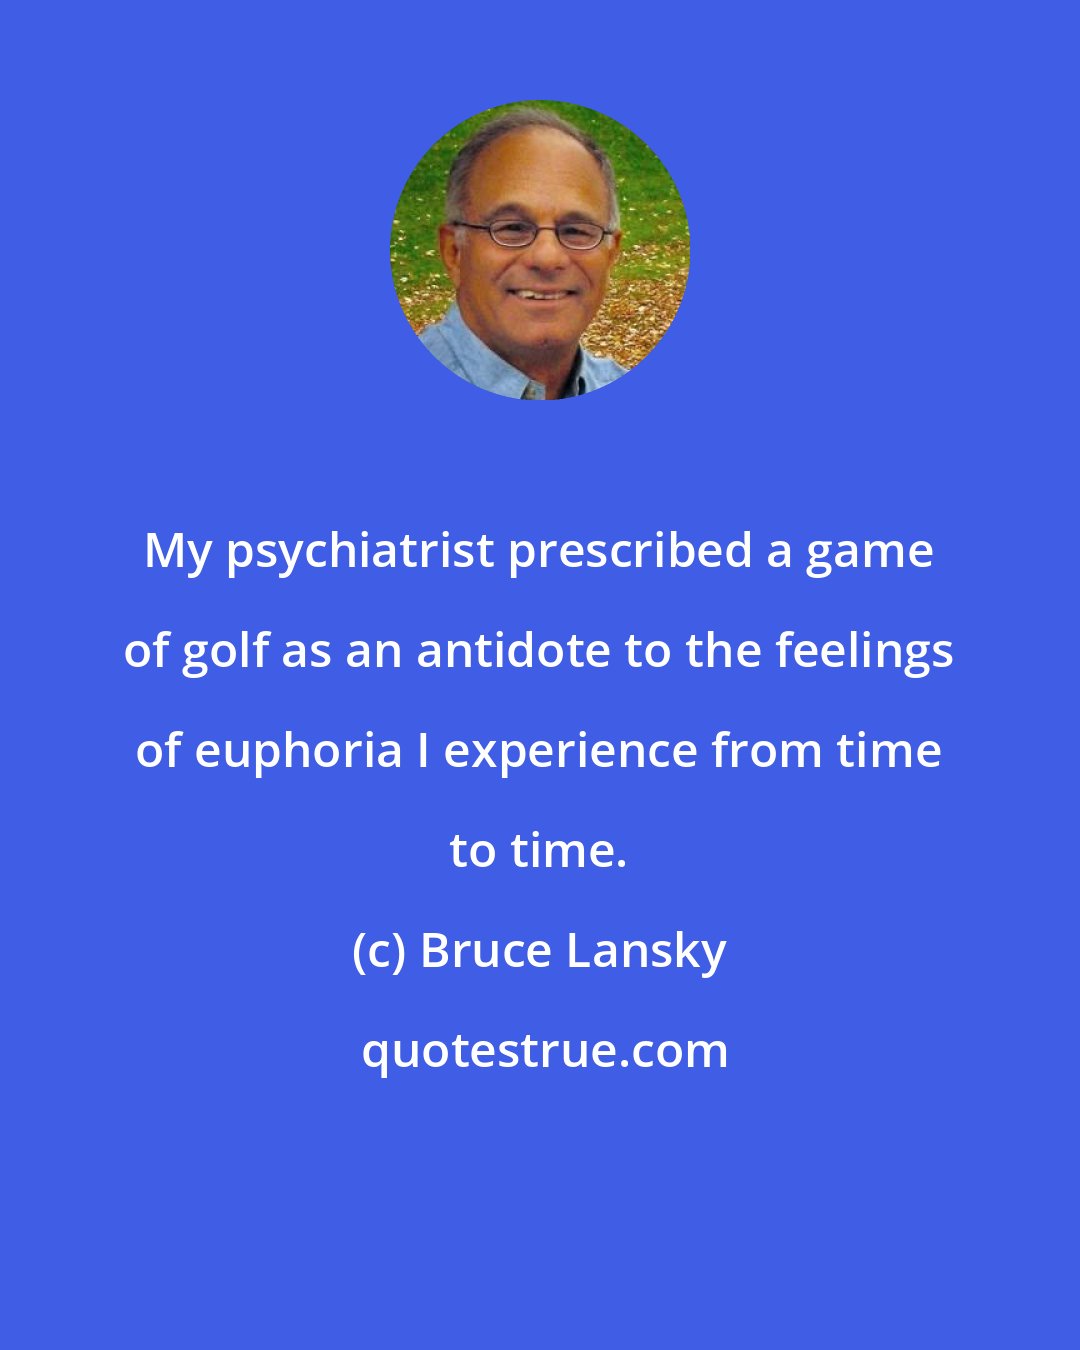 Bruce Lansky: My psychiatrist prescribed a game of golf as an antidote to the feelings of euphoria I experience from time to time.